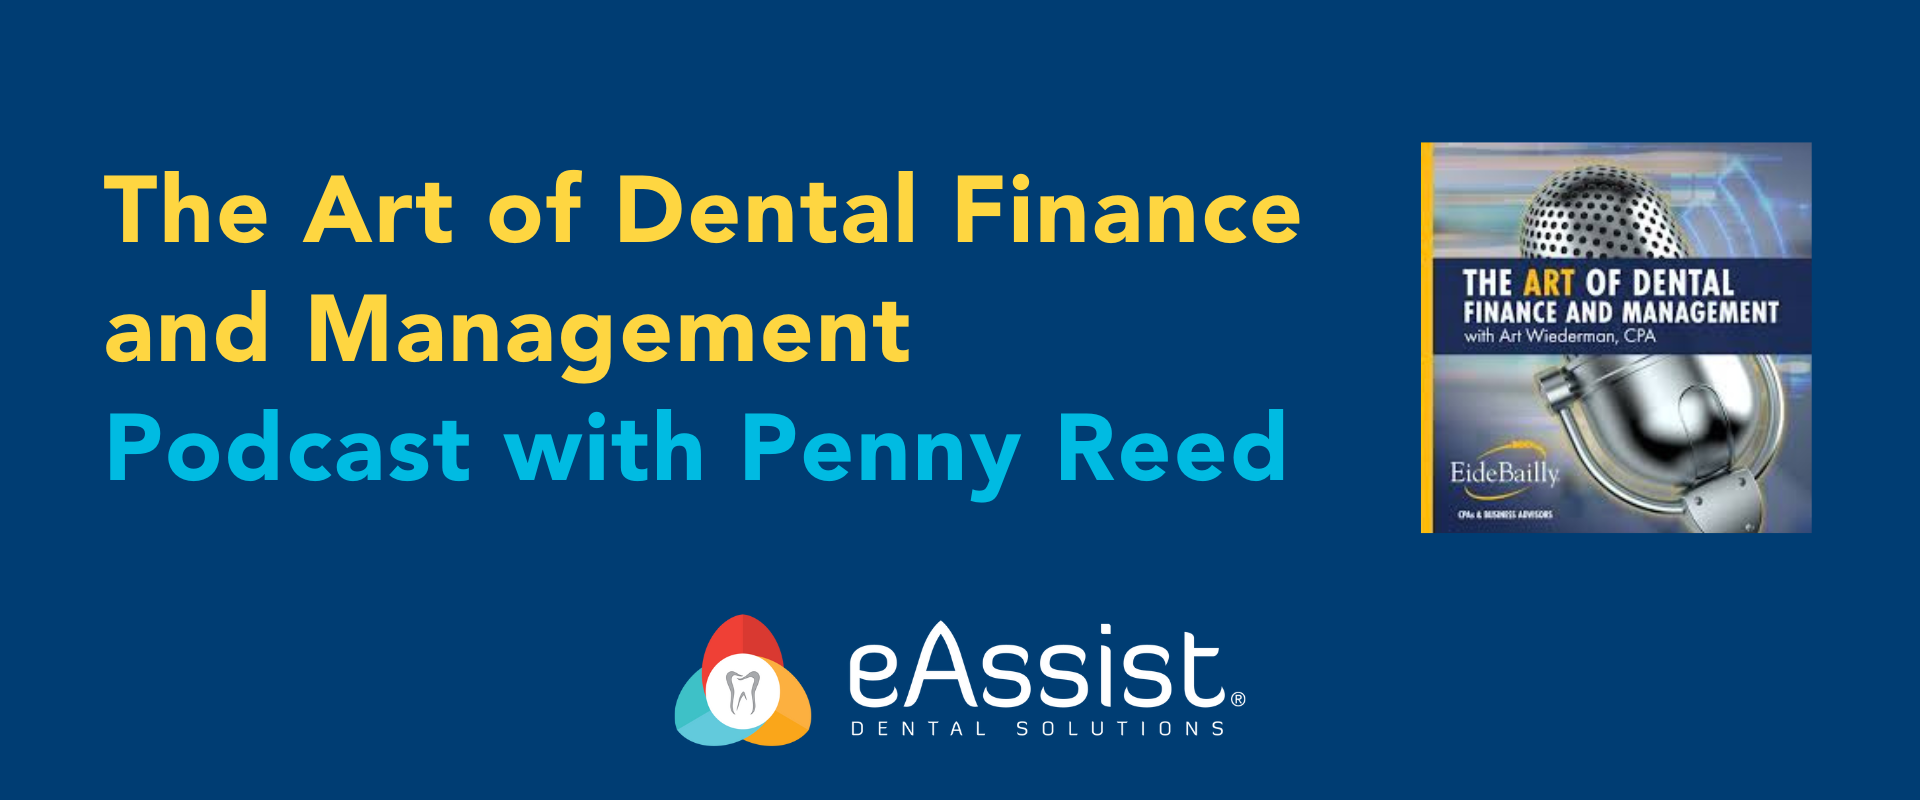 The Art of Dental Finance and Management Podcast with Penny Reed